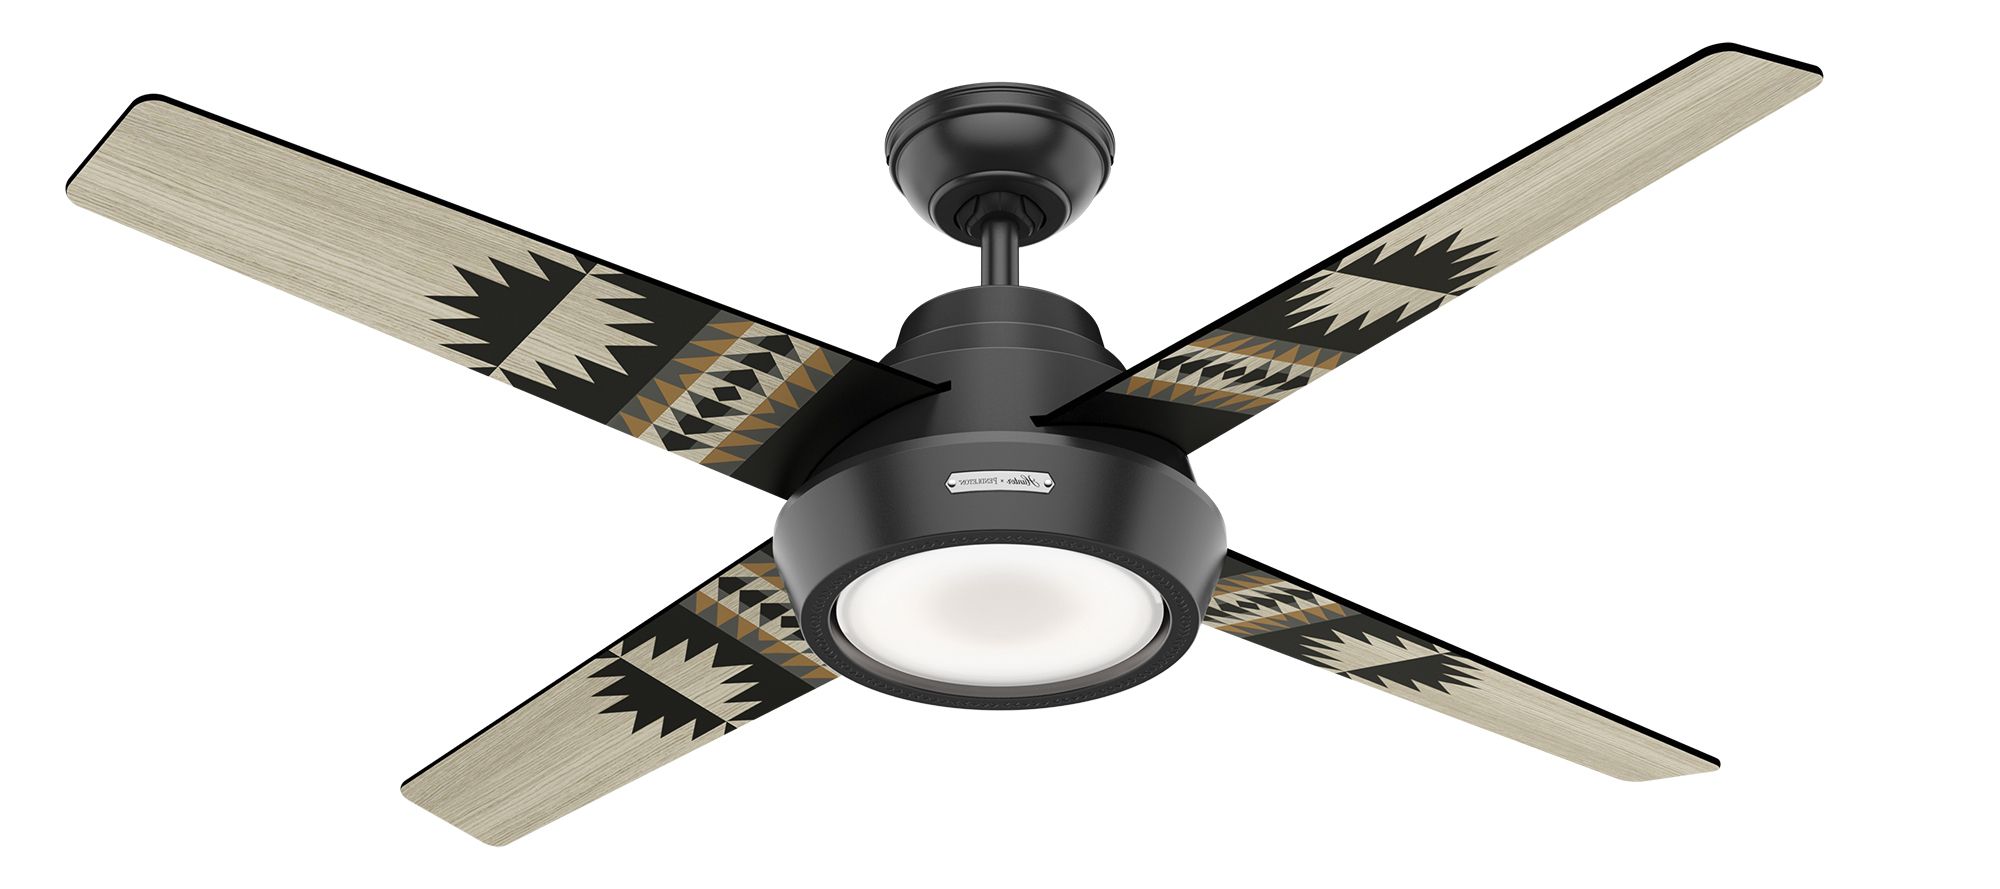 2019 Spider Rock With Led Light 54 Inch Ceiling Fan (View 11 of 20)